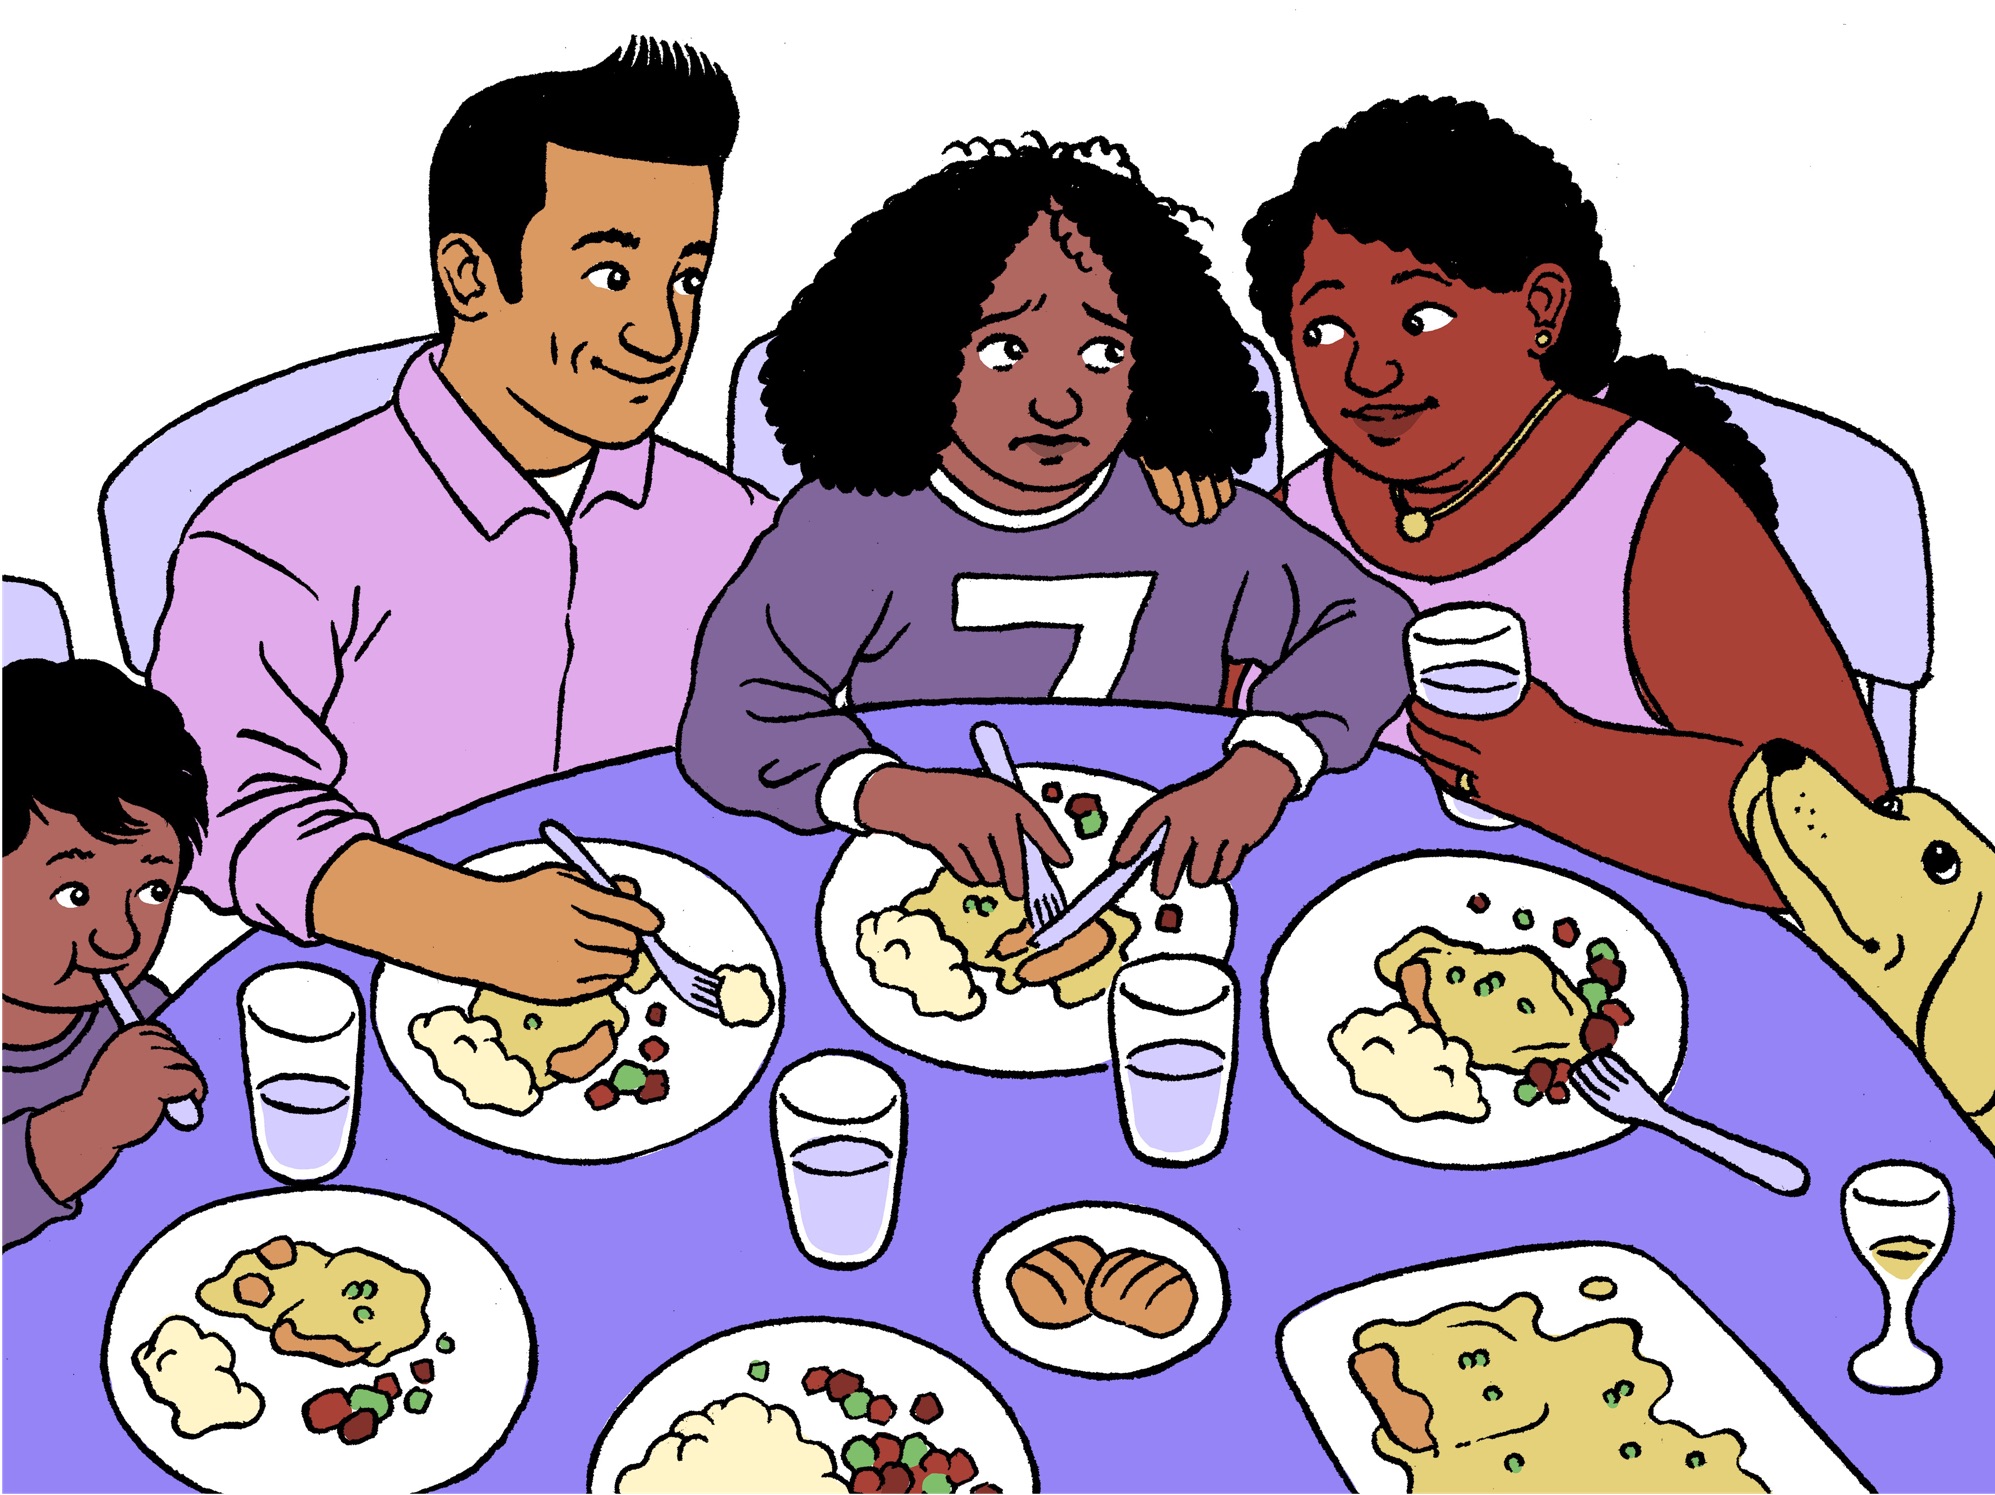 Family-based treatment [Image description: a teen girl sits at a meal with parents on either side and a younger brother and a dog]